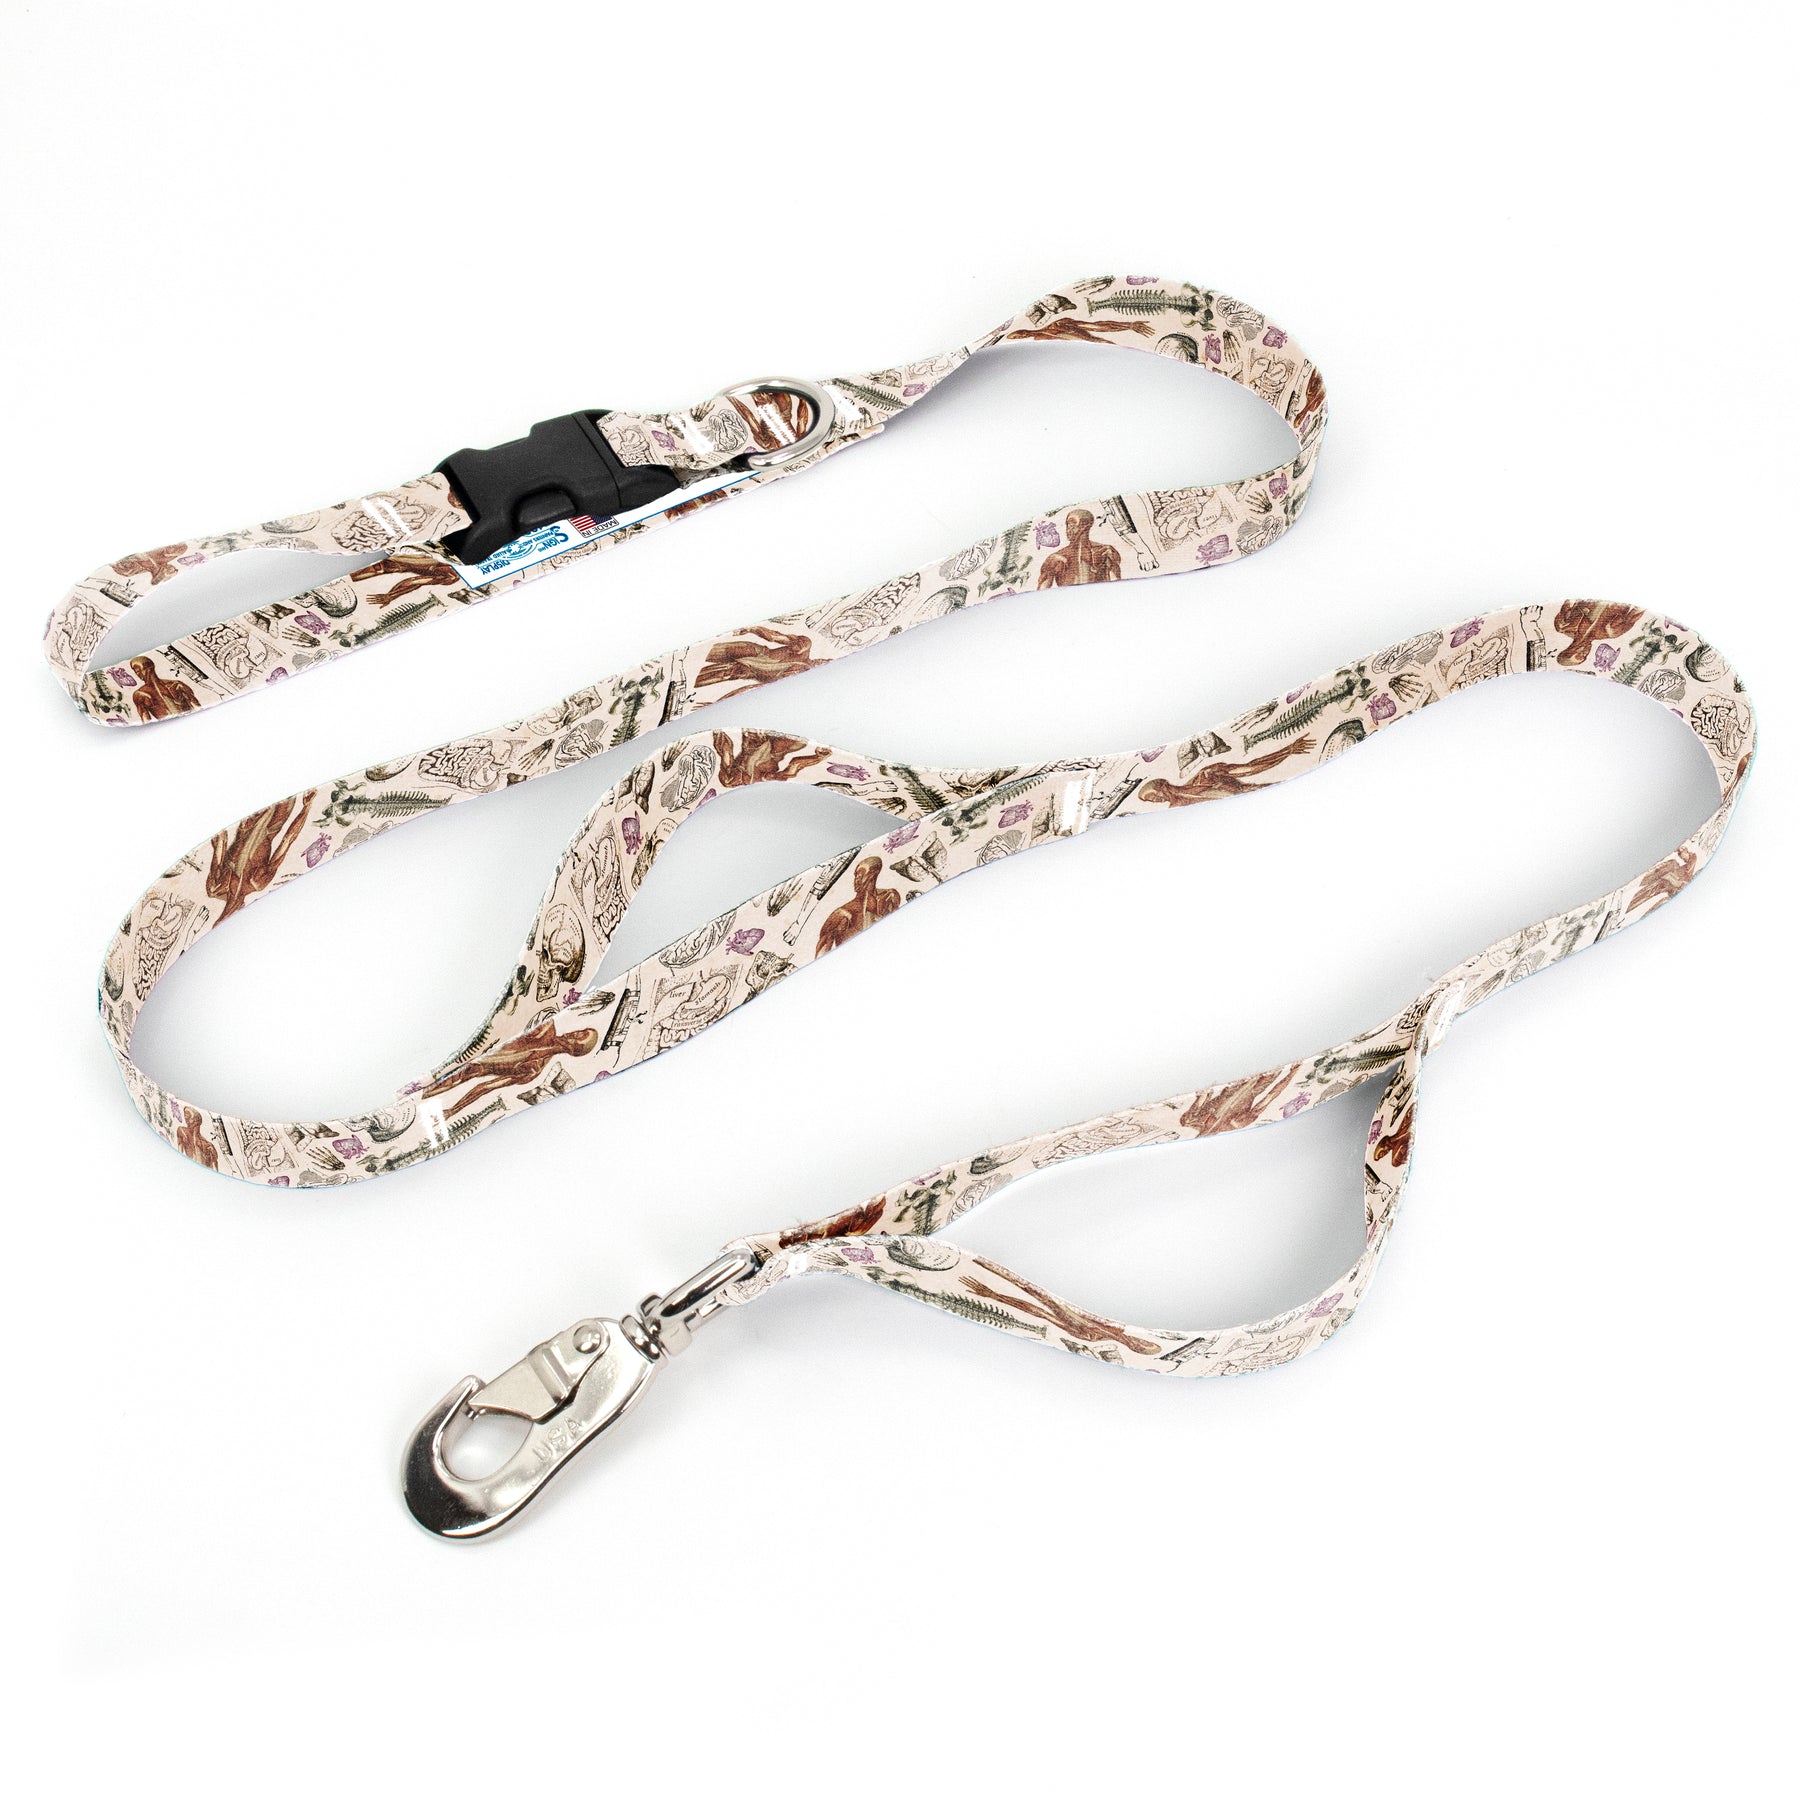 what are dog leads made of